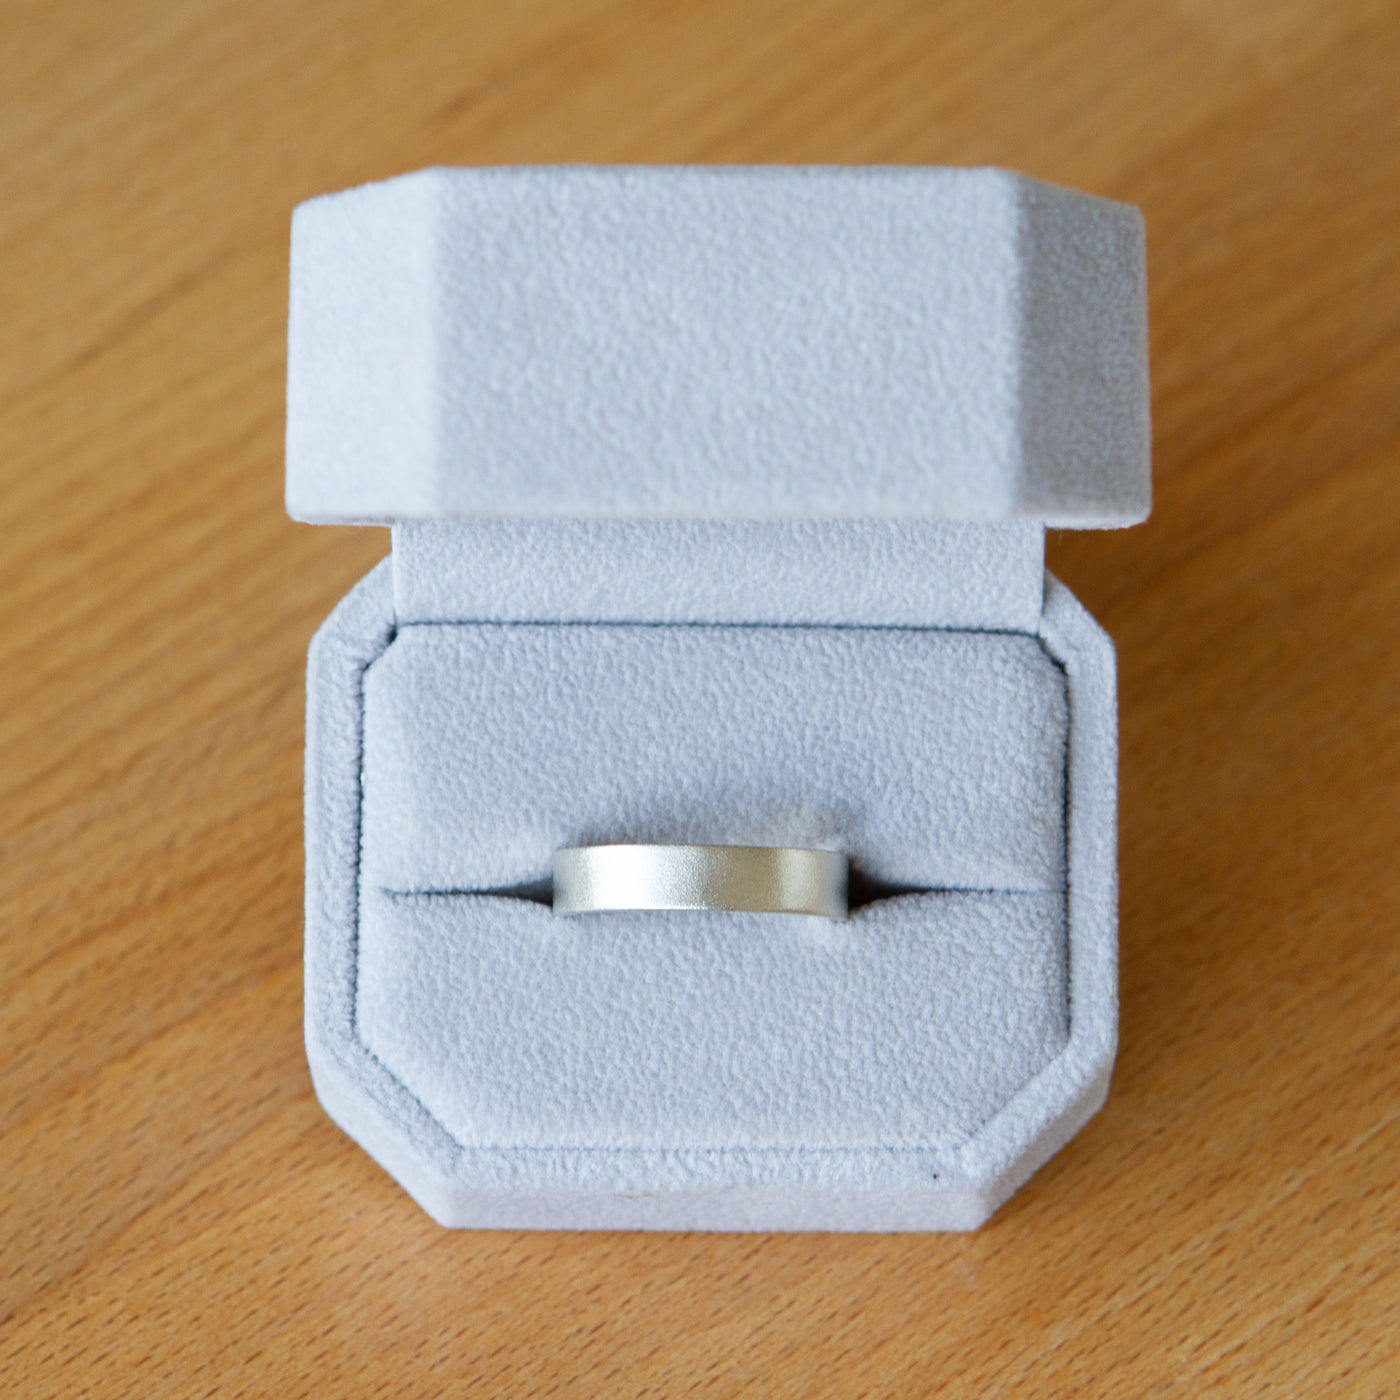 14k white gold 5mm wide Yosemite band in a ring box